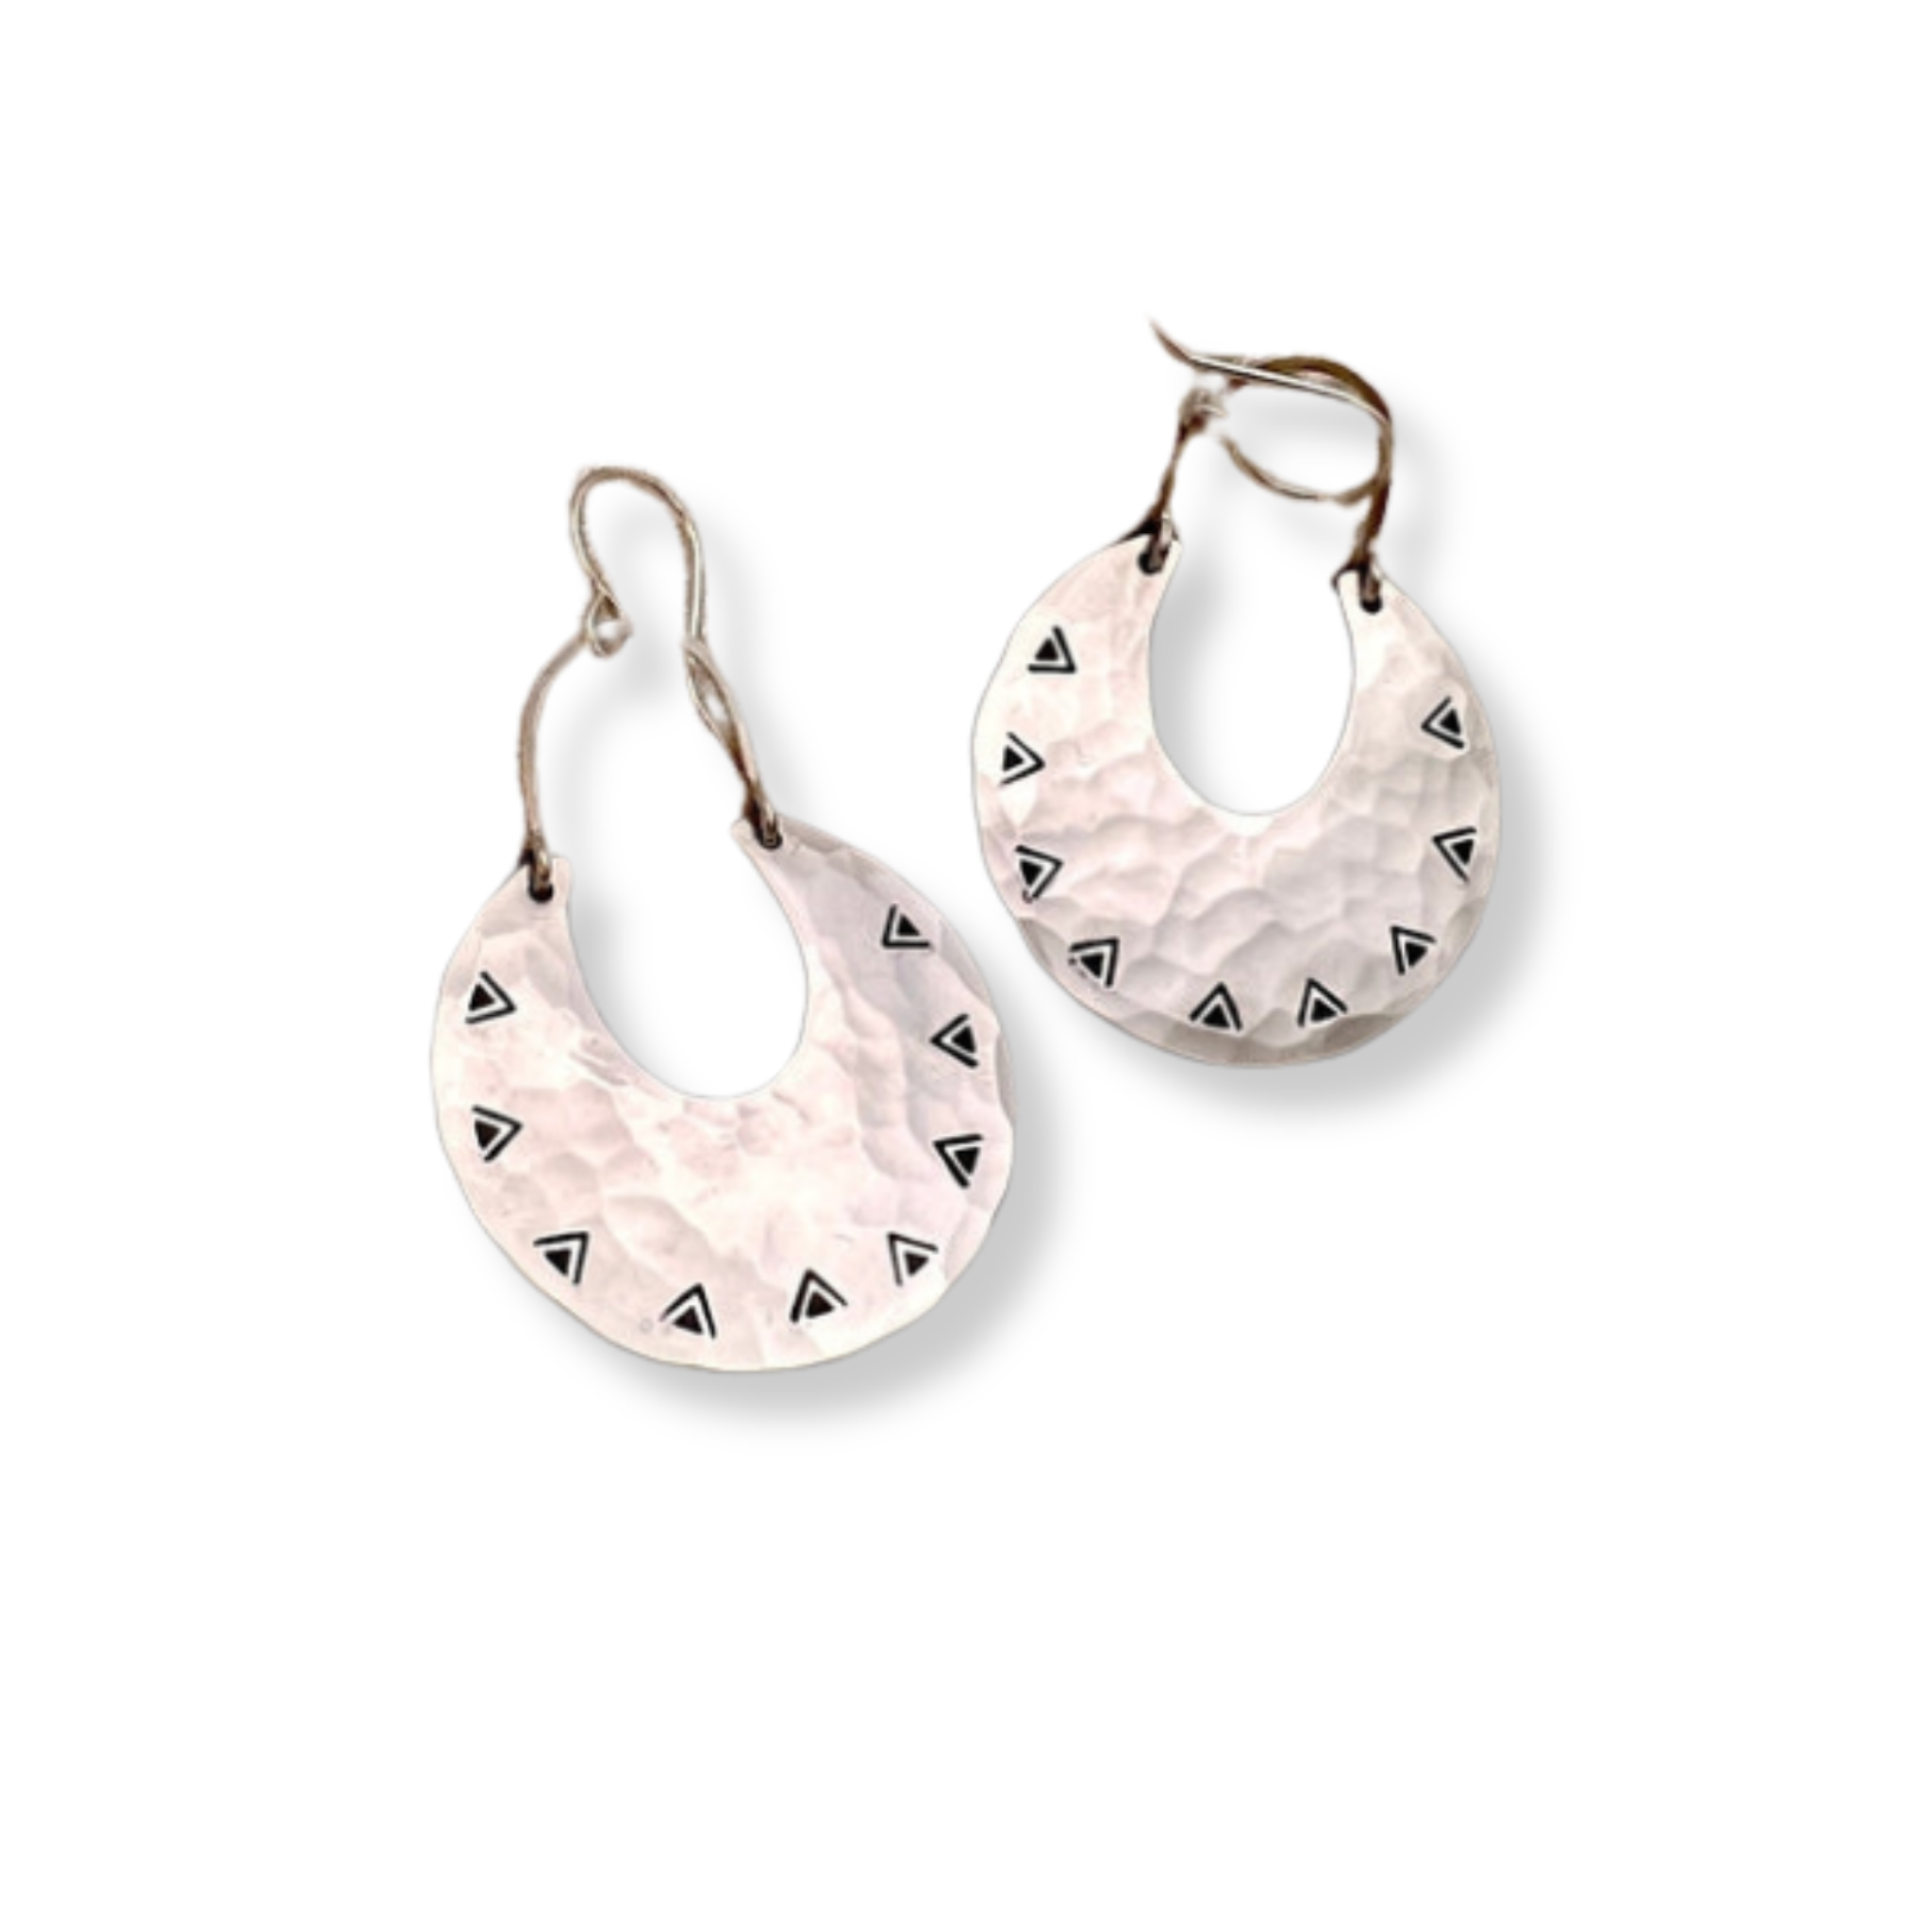 hammered rounded horseshoe shaped earrings with stamped triangle design